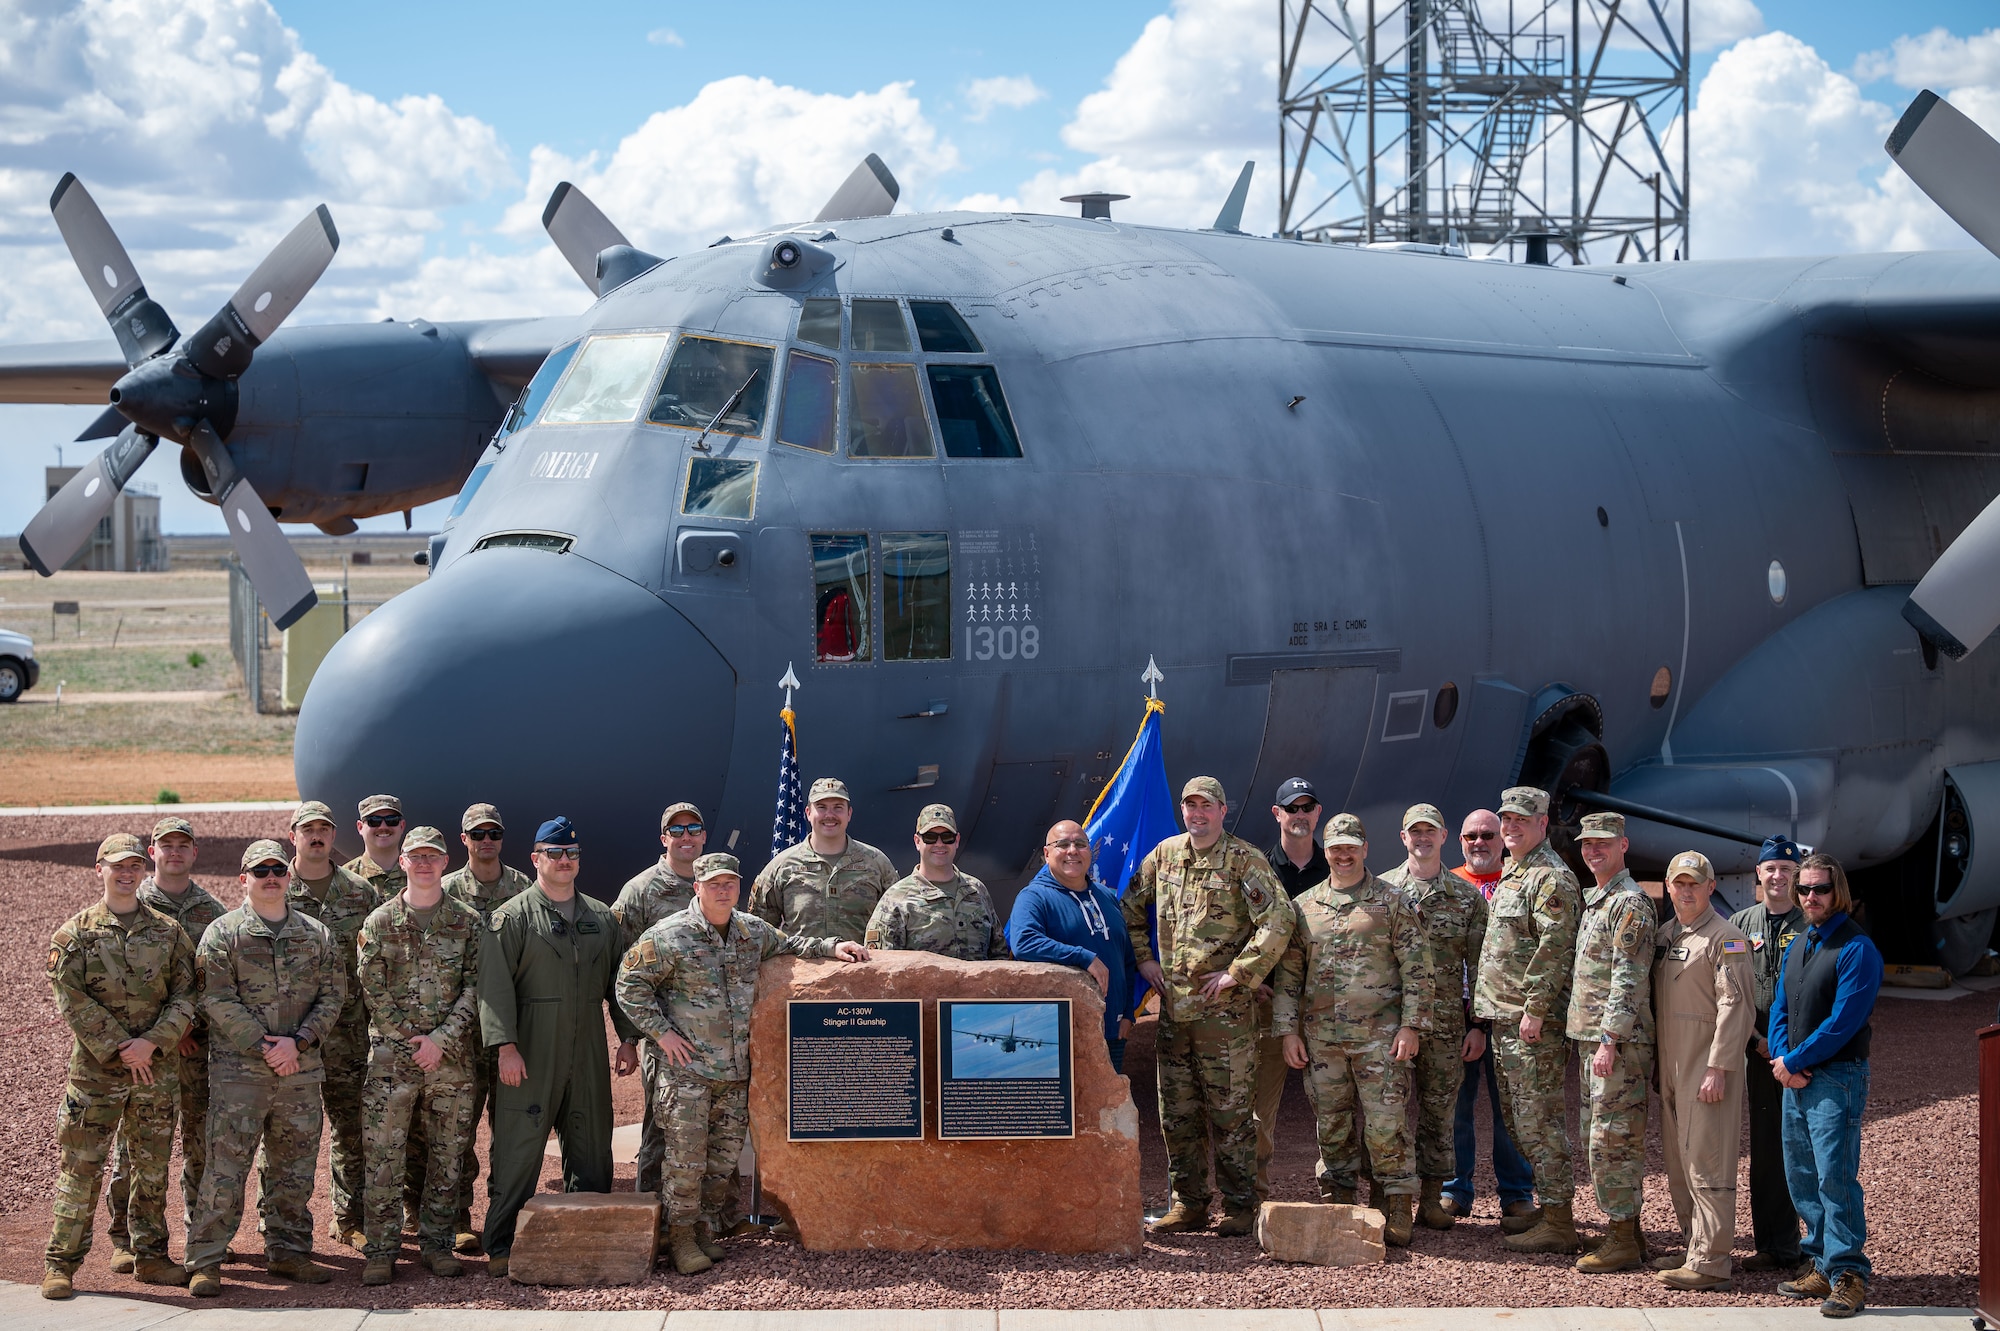 Members from the 27th Special Operations Wing and the 1st Special Operations Wing gather for a photo after a ceremony unveiling the AC-130W Stinger II gunship static display at Cannon Air Force Base, New Mexico, March 21, 2024. In over 10 years of service as a gunship, the AC-130W flew a combined 2,170 combat sorties, totaling over 15,000 hours. (U.S. Air Force photo by 2nd Lt. Charles Moye)